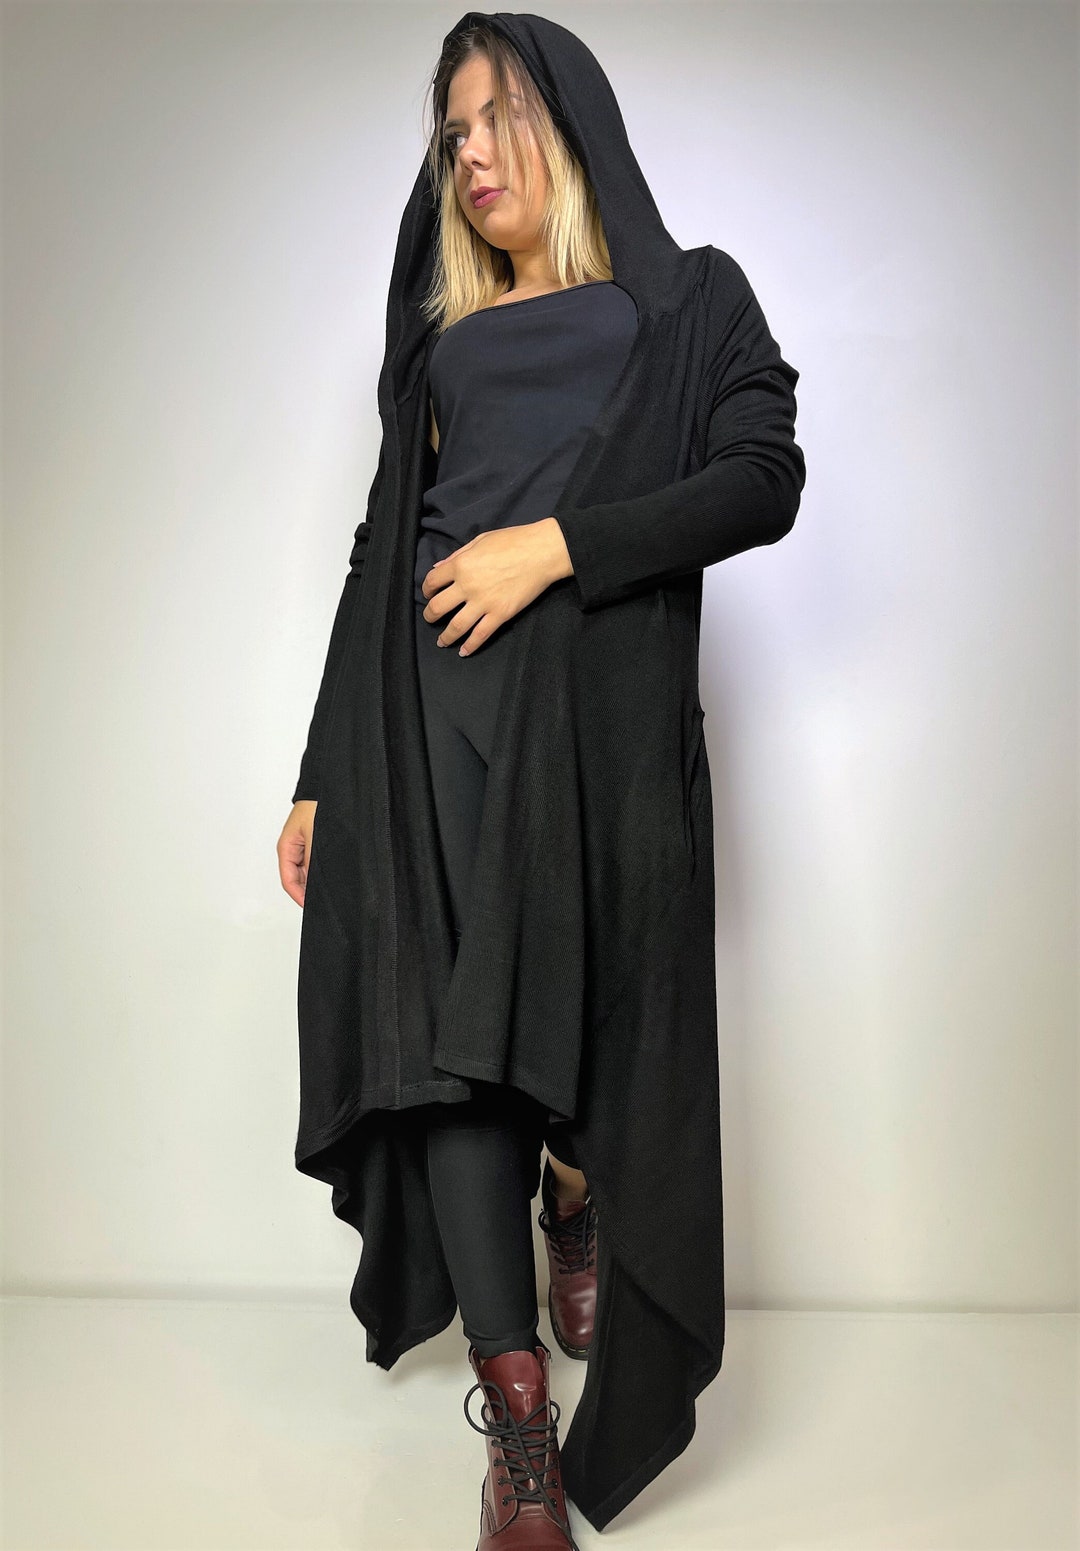 Asymmetrical Cloak With Hood Black Sweater Cardigan With - Etsy